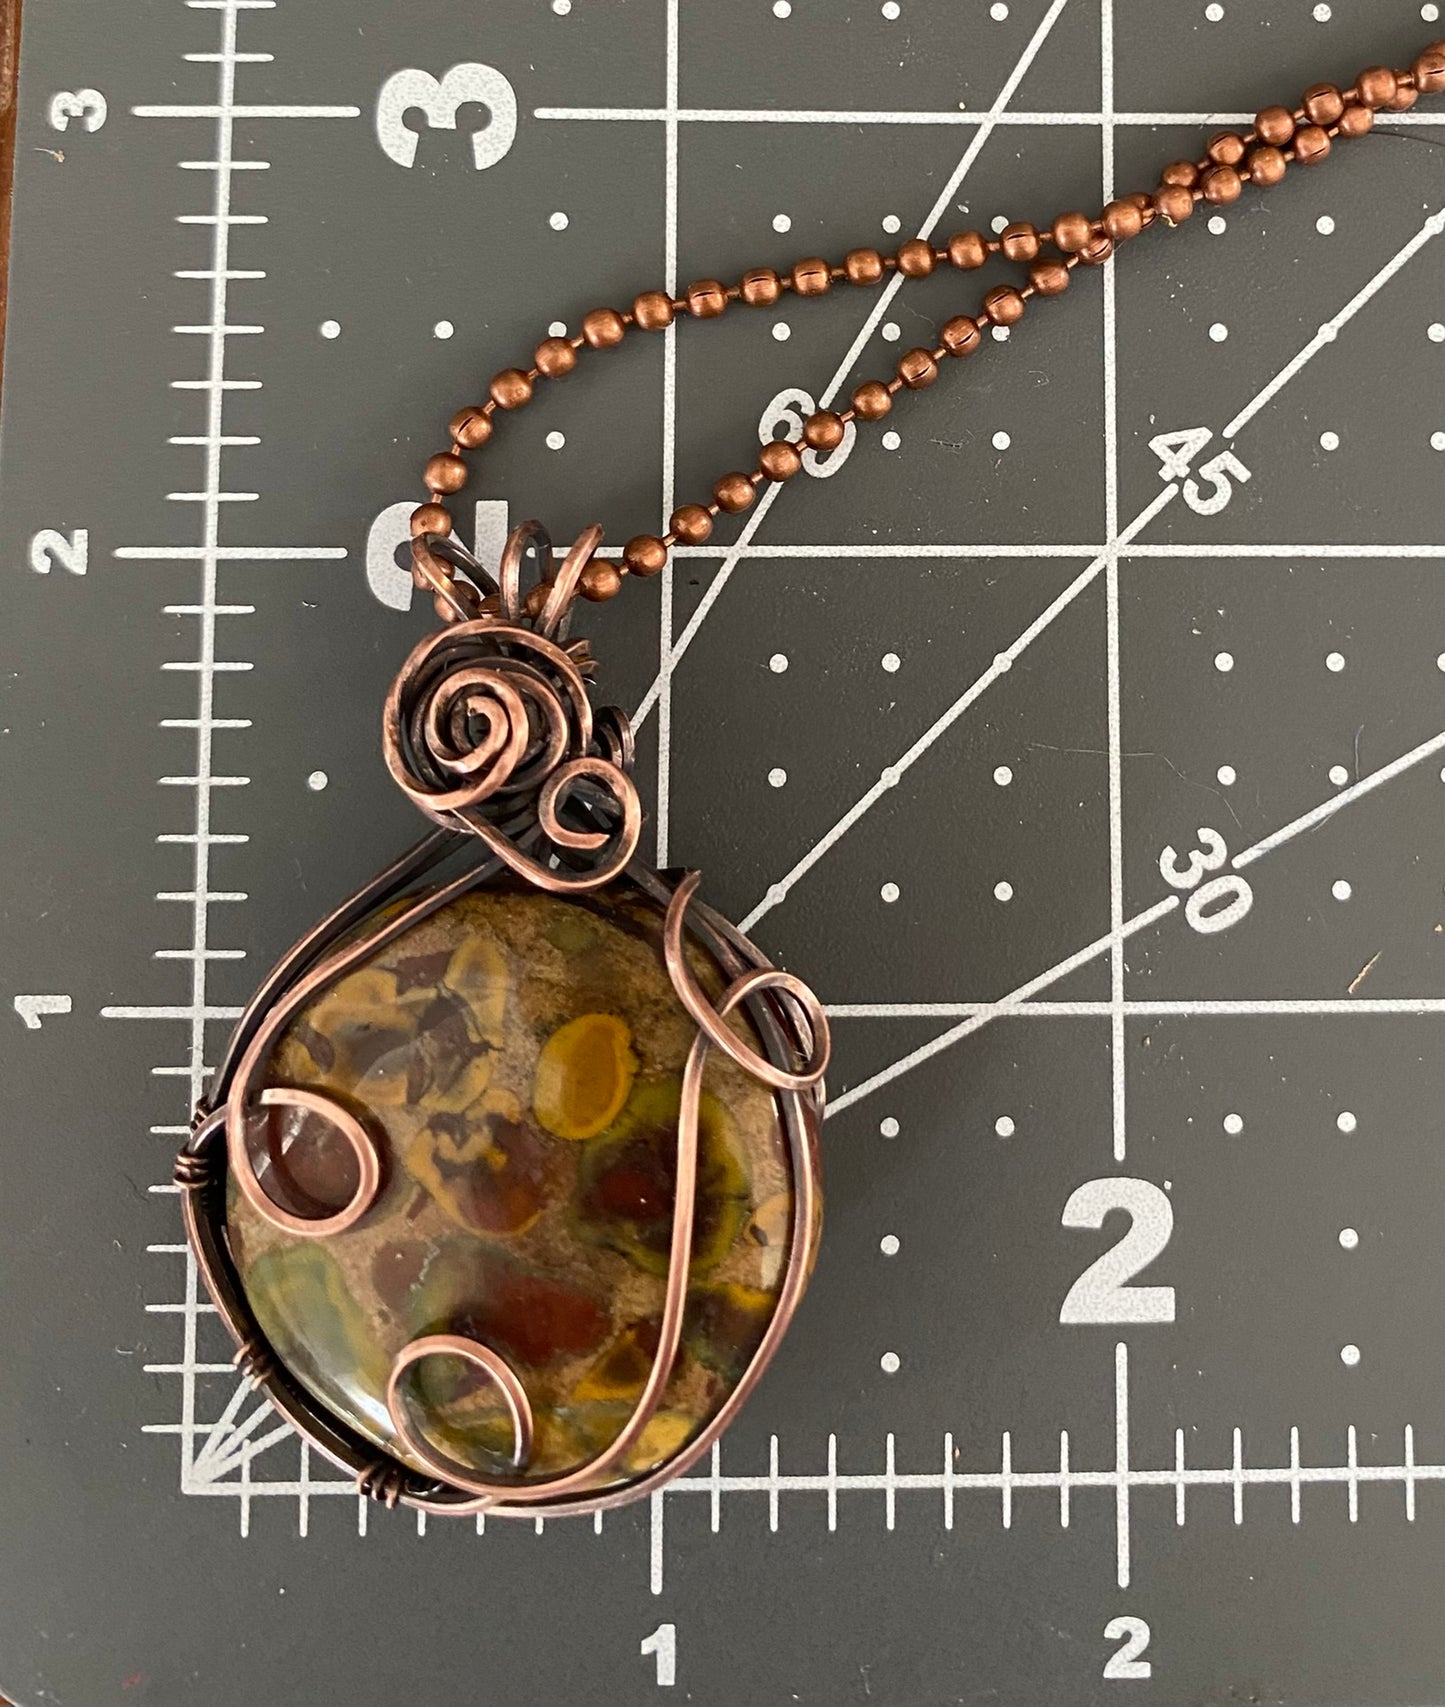 Natural Rain Forest Wire Wrapped Pendant